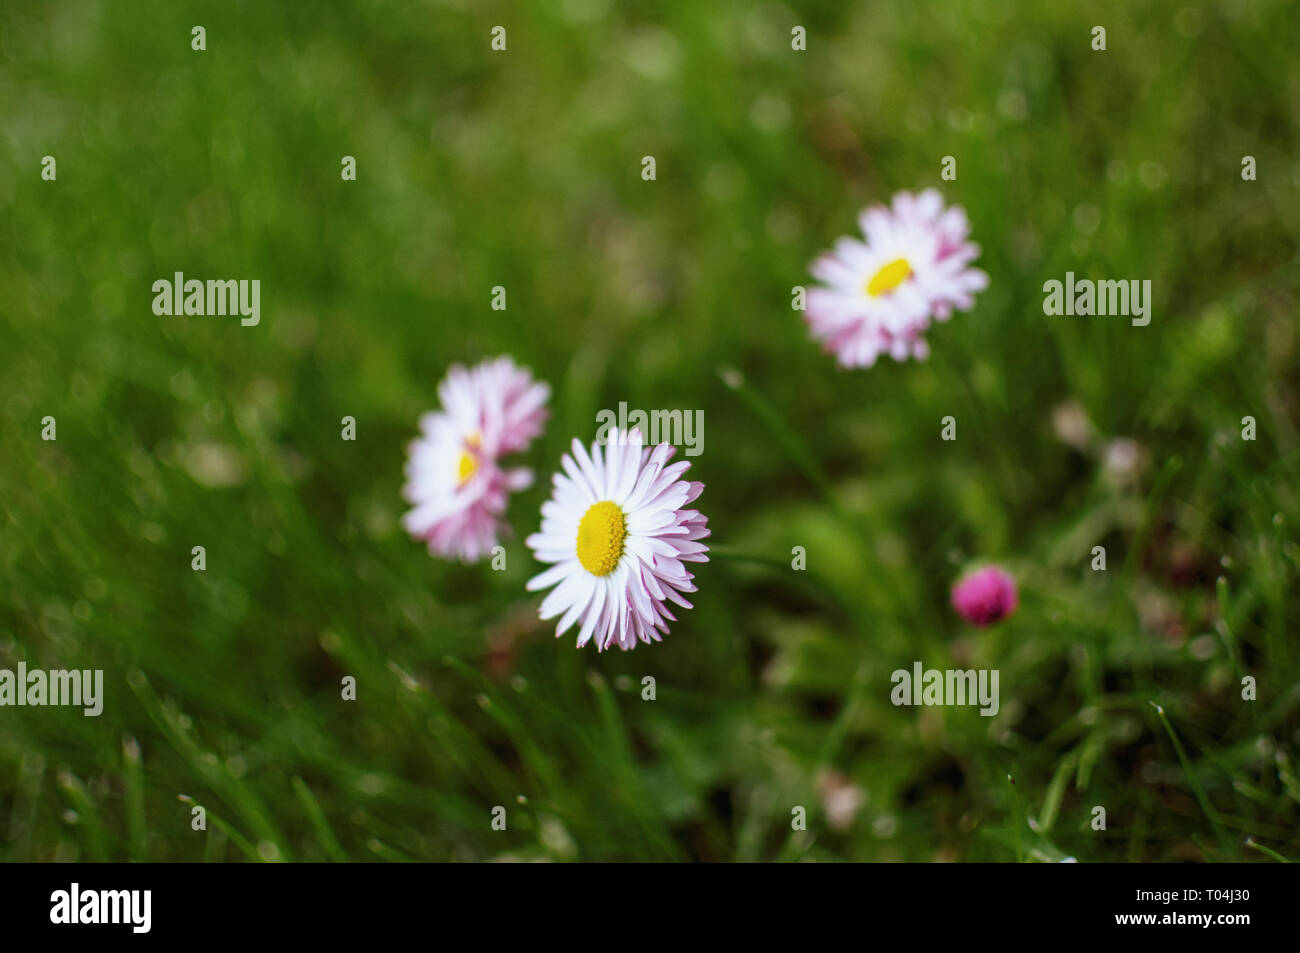 Bellis perennis in the green grass Stock Photo